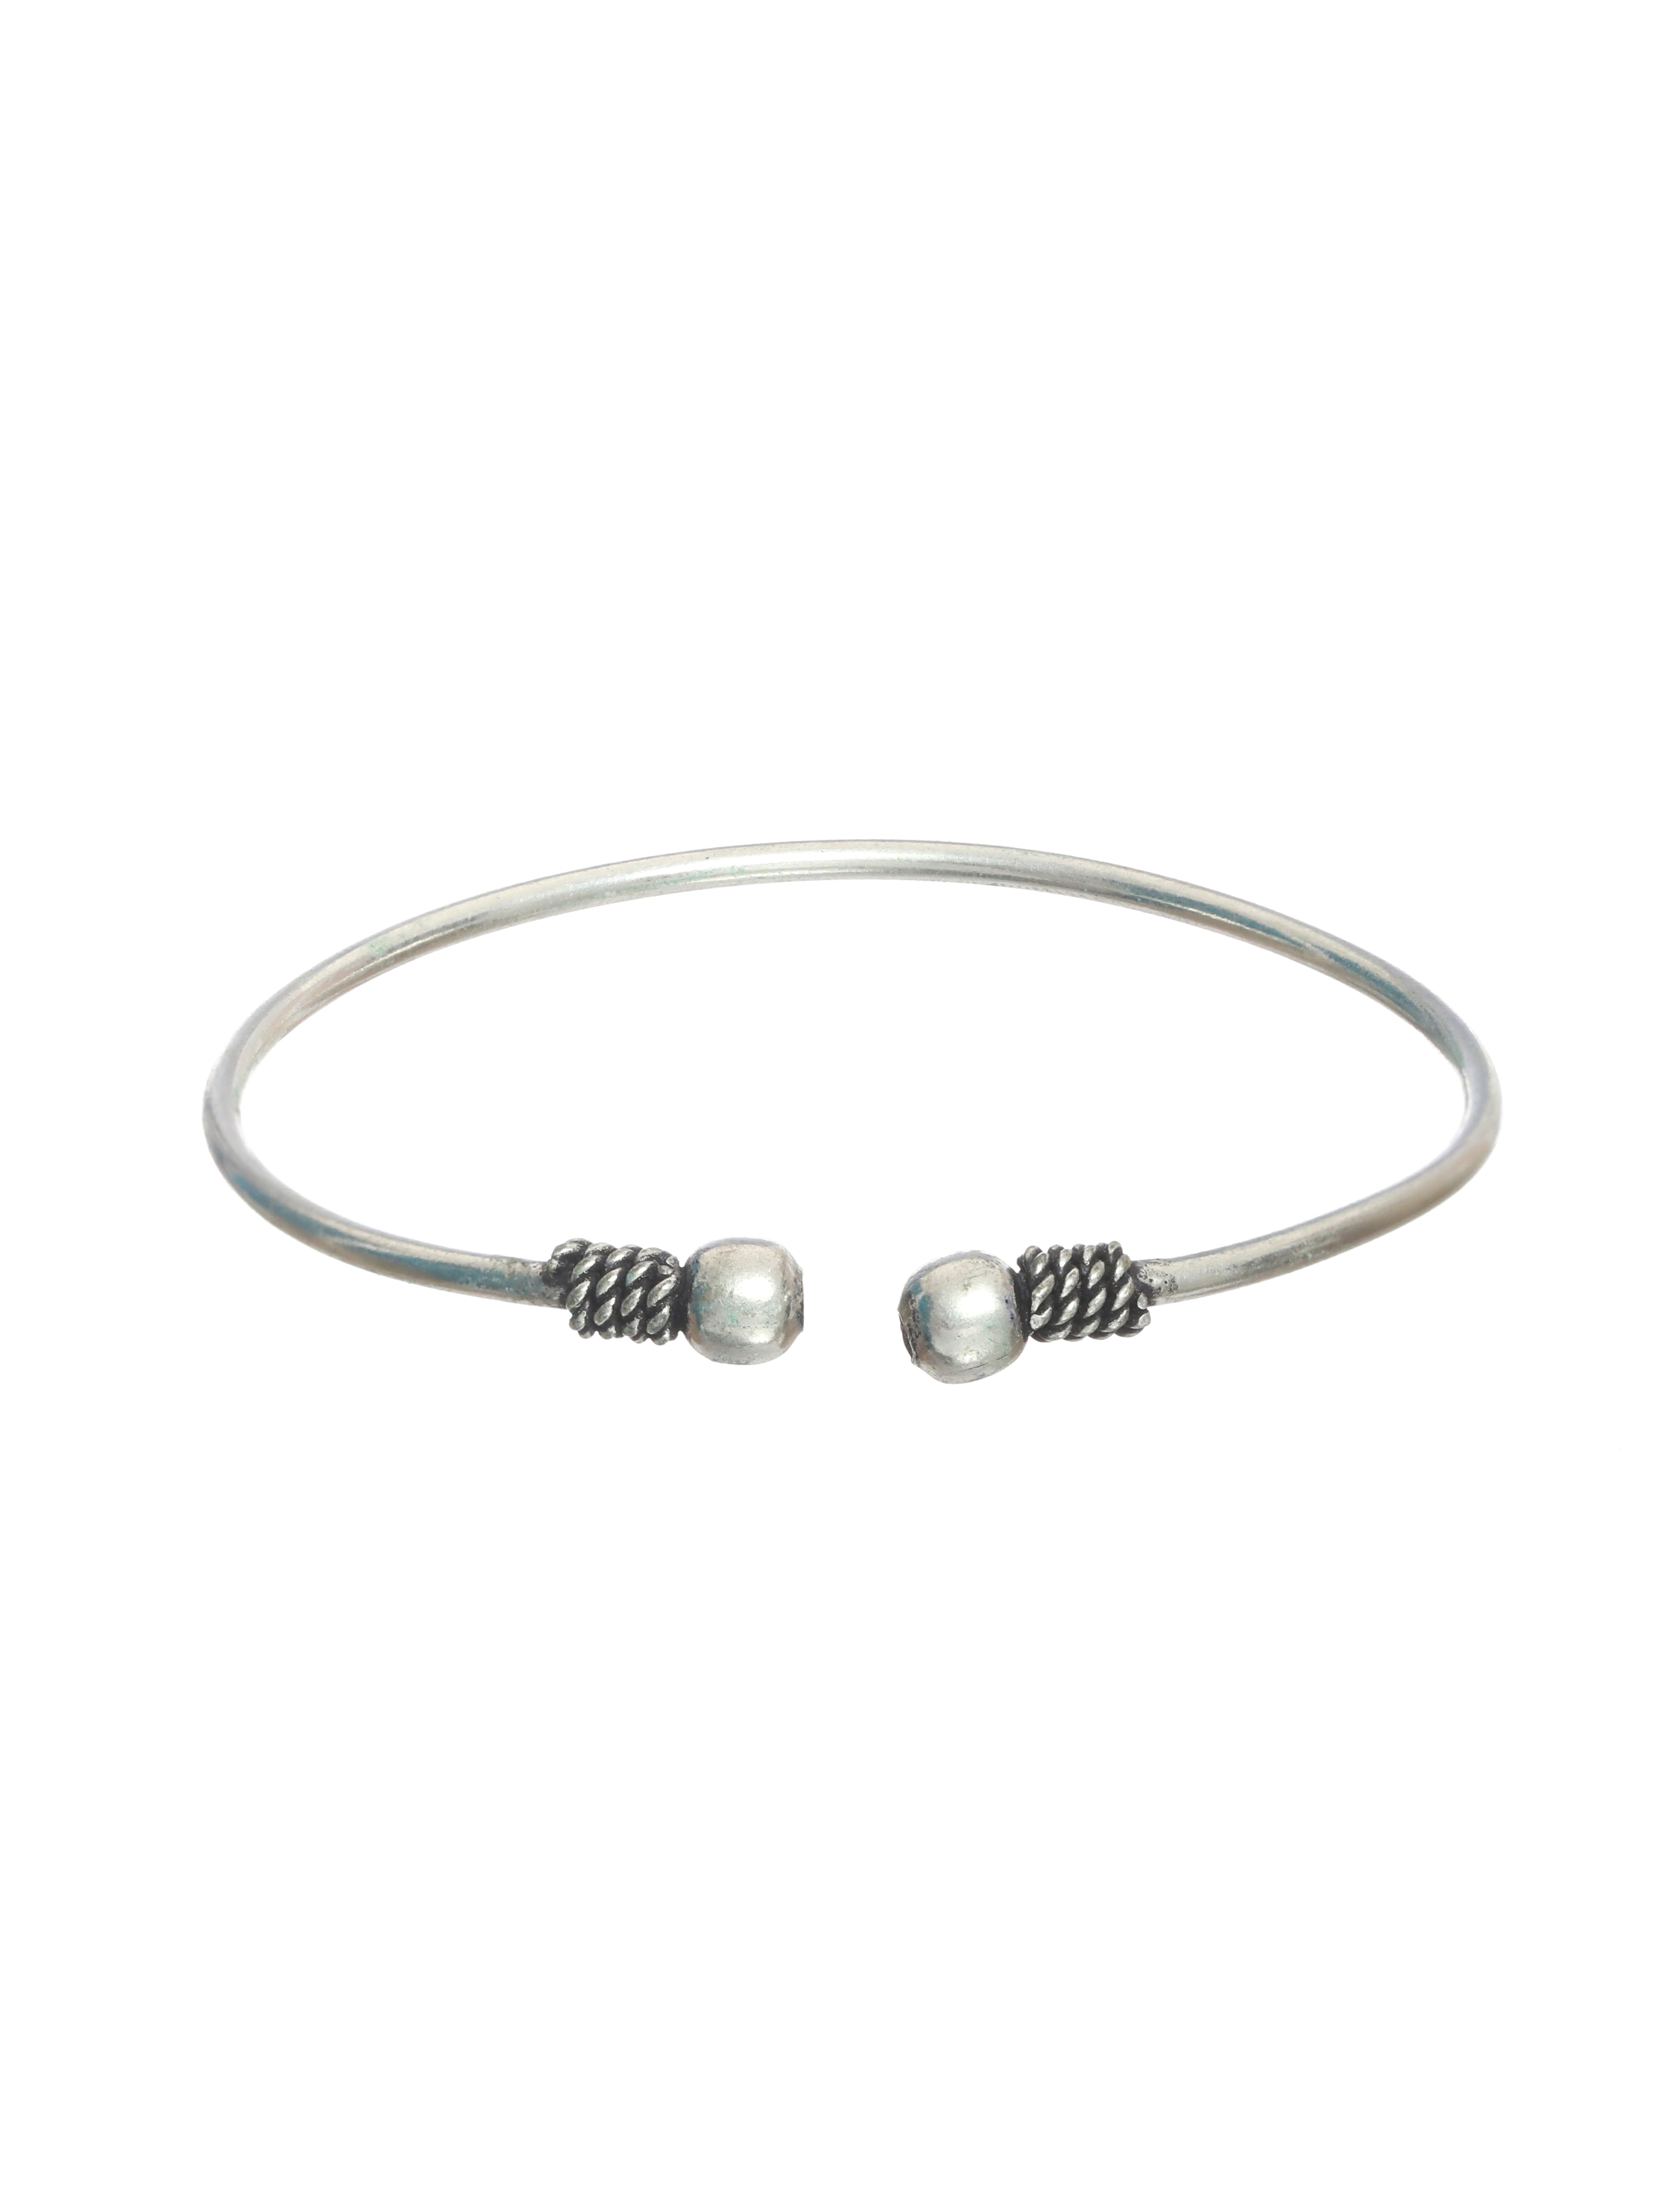 Oxidised Silver-Plated German Silver Jewellery Set with Bracelet,Ring & Toe Ring